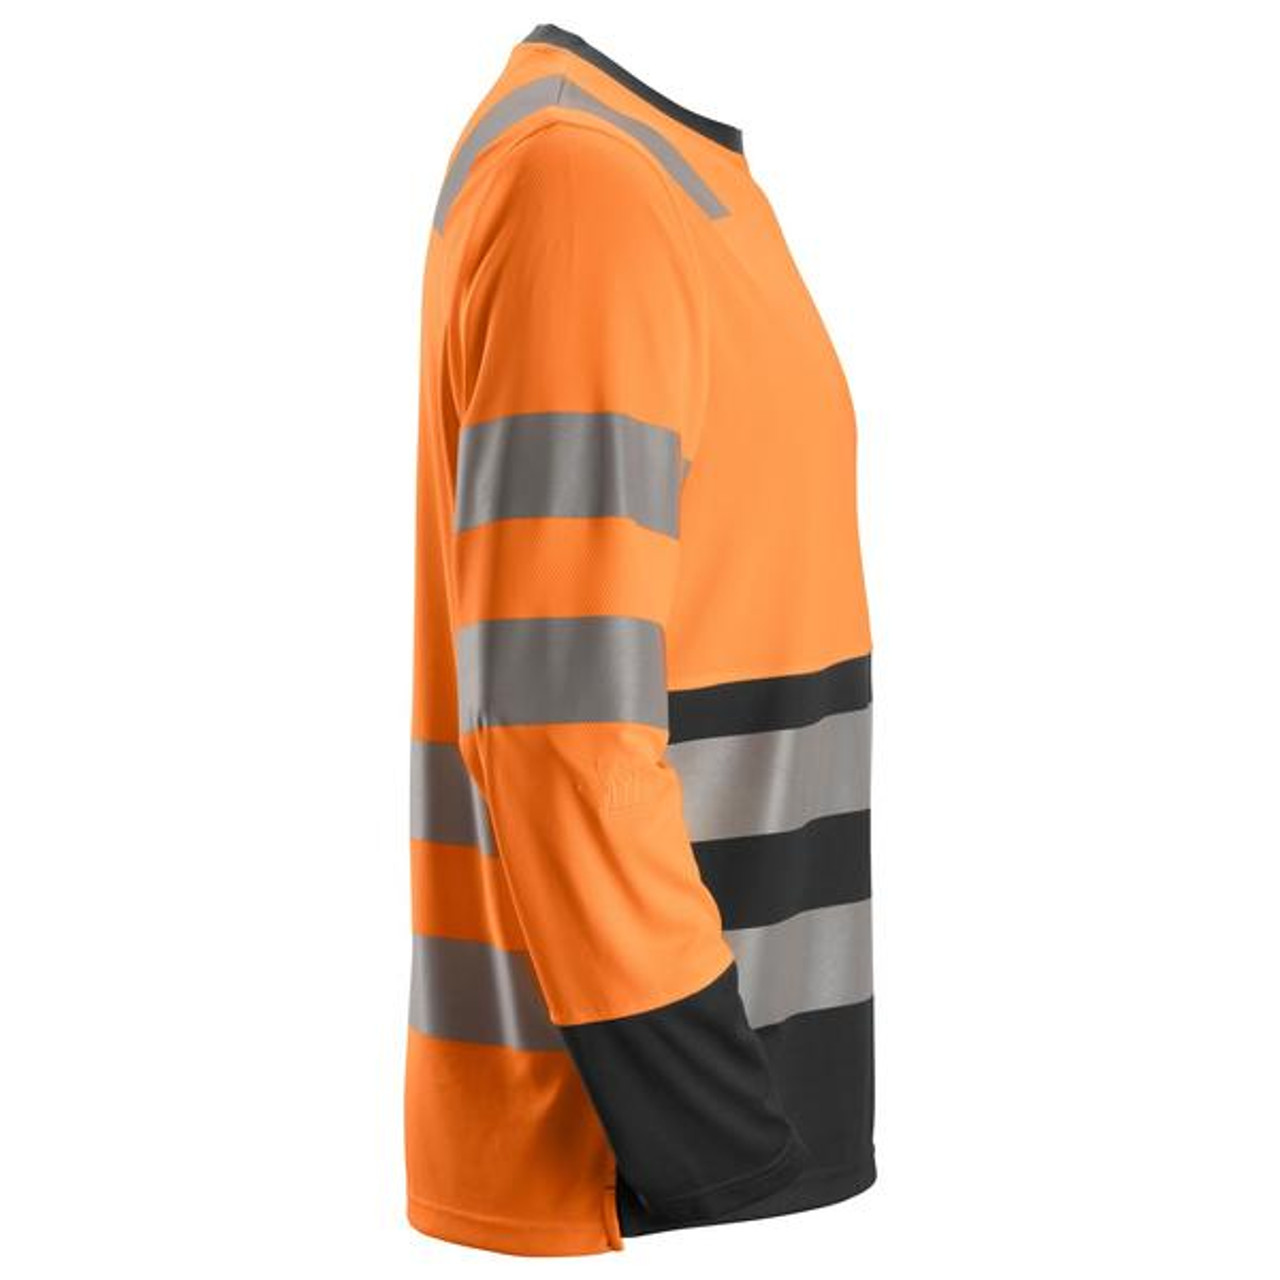 Buy online in Australia and New Zealand a  High Vis Orange  T-Shirt for Carpenters that are comfortable and durable.